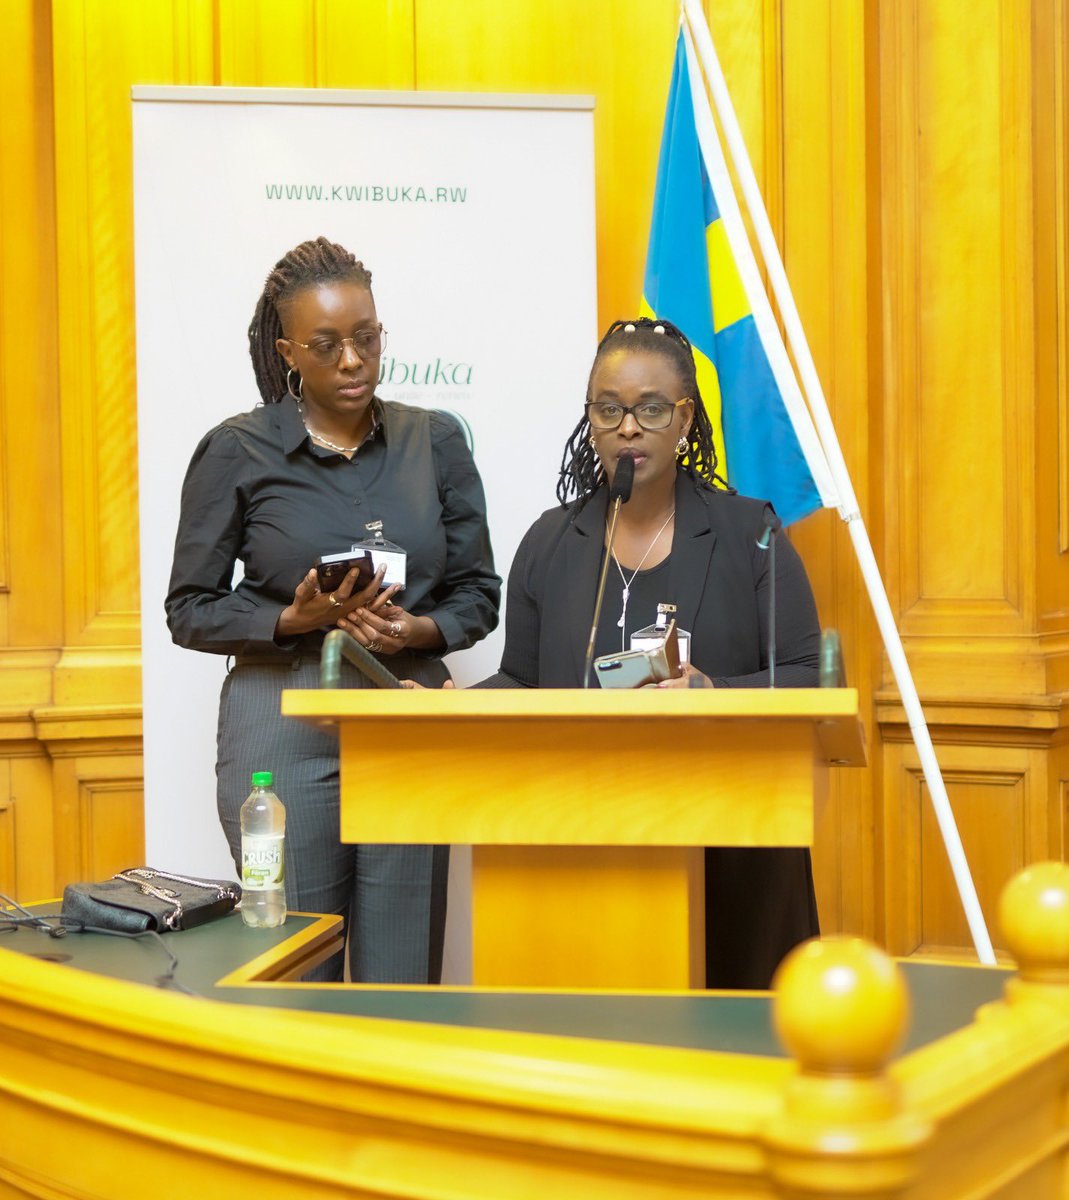 Francoise Moti, a Genocide Survivor and member of the Rwandan community in Sweden, courageously recounted her experiences during the 1994 Genocide against the Tutsi. She passionately urged the international community to uphold the commitment of 'Never Again.' #Kwibuka30